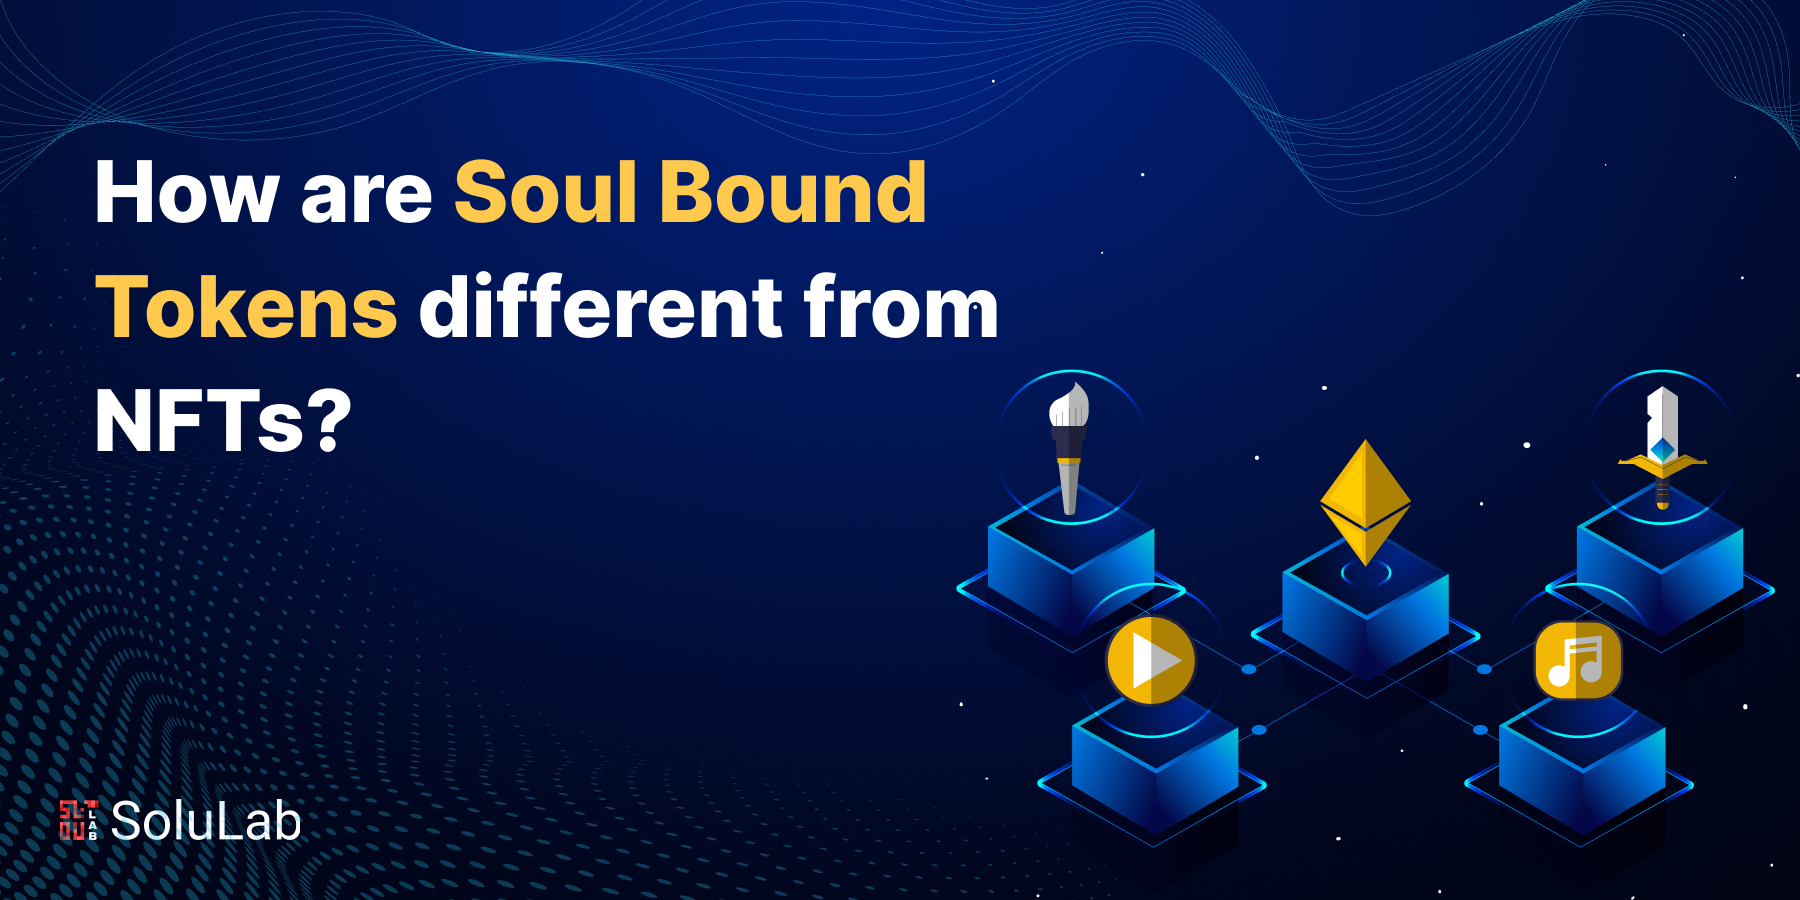 How are Soul Bound Tokens different from NFTs?